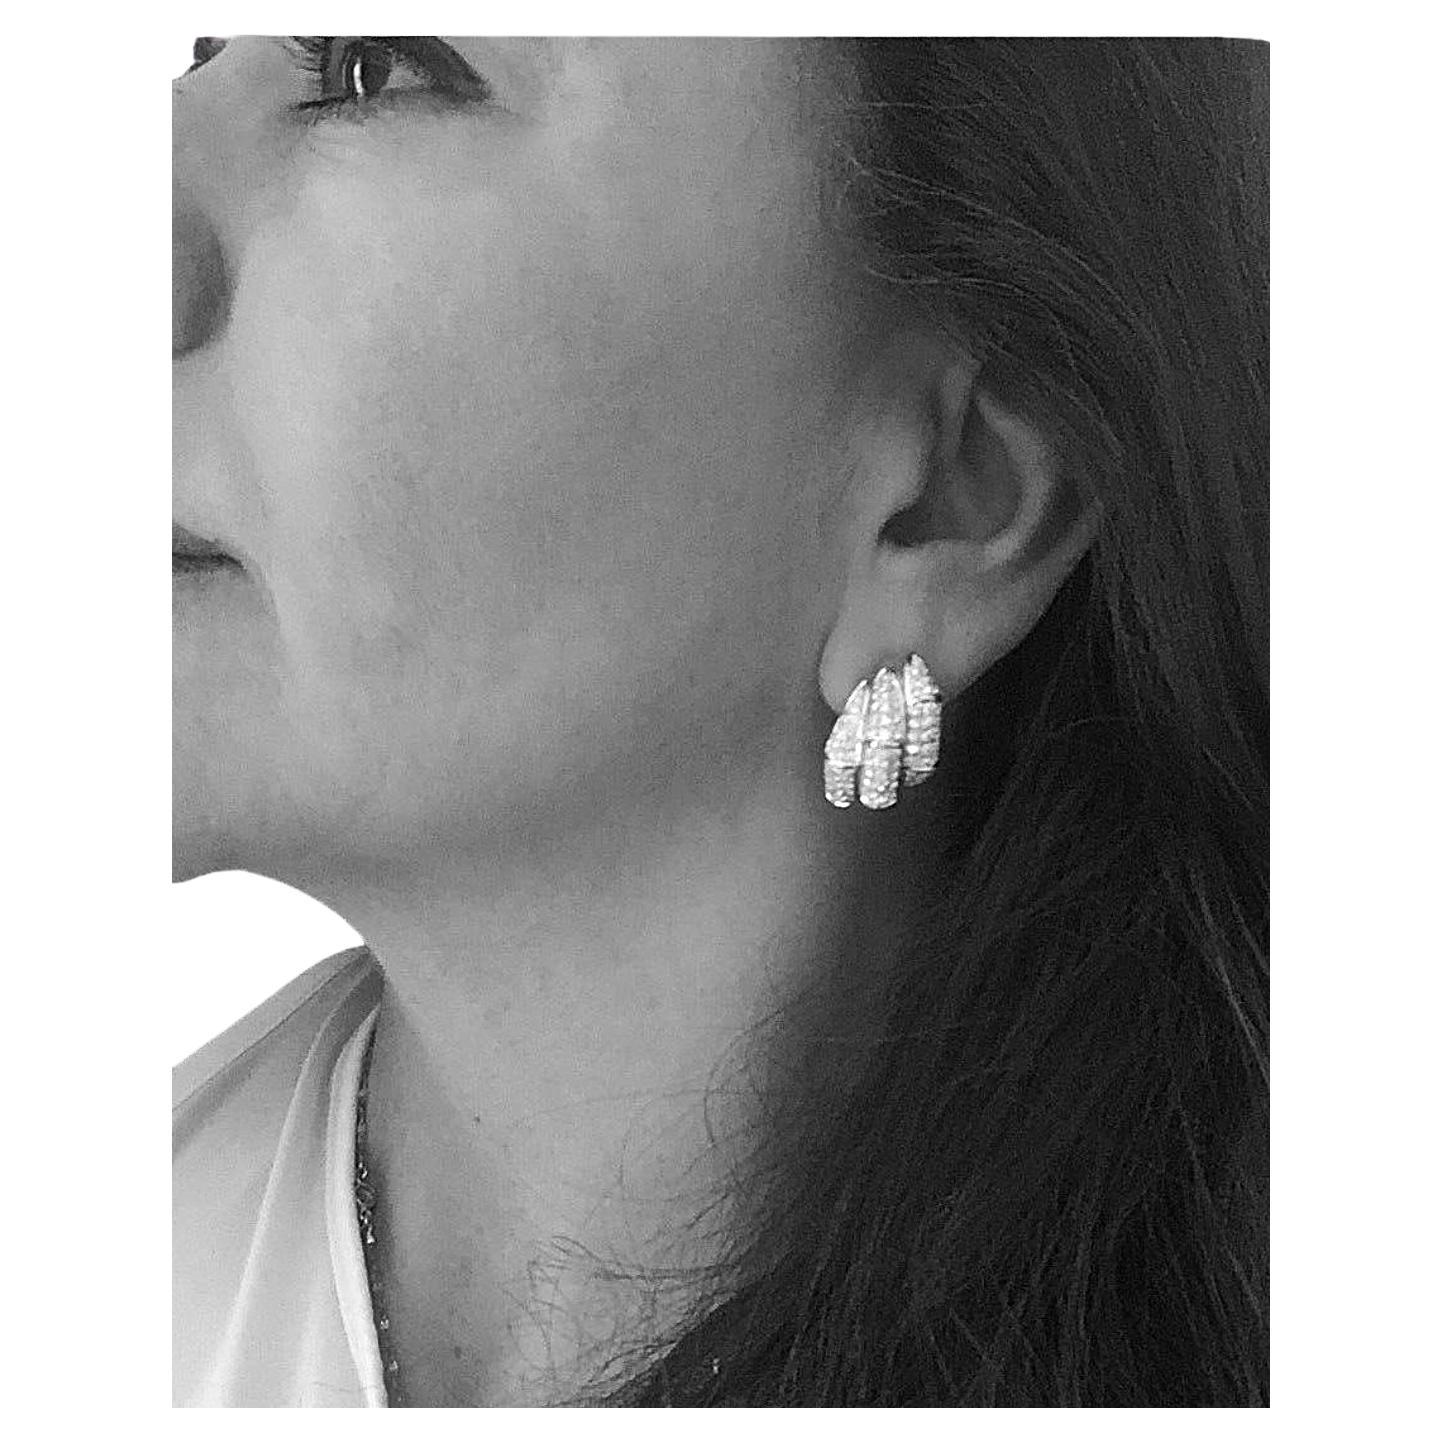 Stunning Clip-on Drop Earrings 4.00 Carat Diamond Earrings 18K White Gold
Total Diamond Weight: 4.0 Carat  E-F/VVS-VS1 
Earrings have a length of 25.4mm, Width of earrings measures 17.2mm at the widest point
Stamped: SALVINI 18K White Gold Full